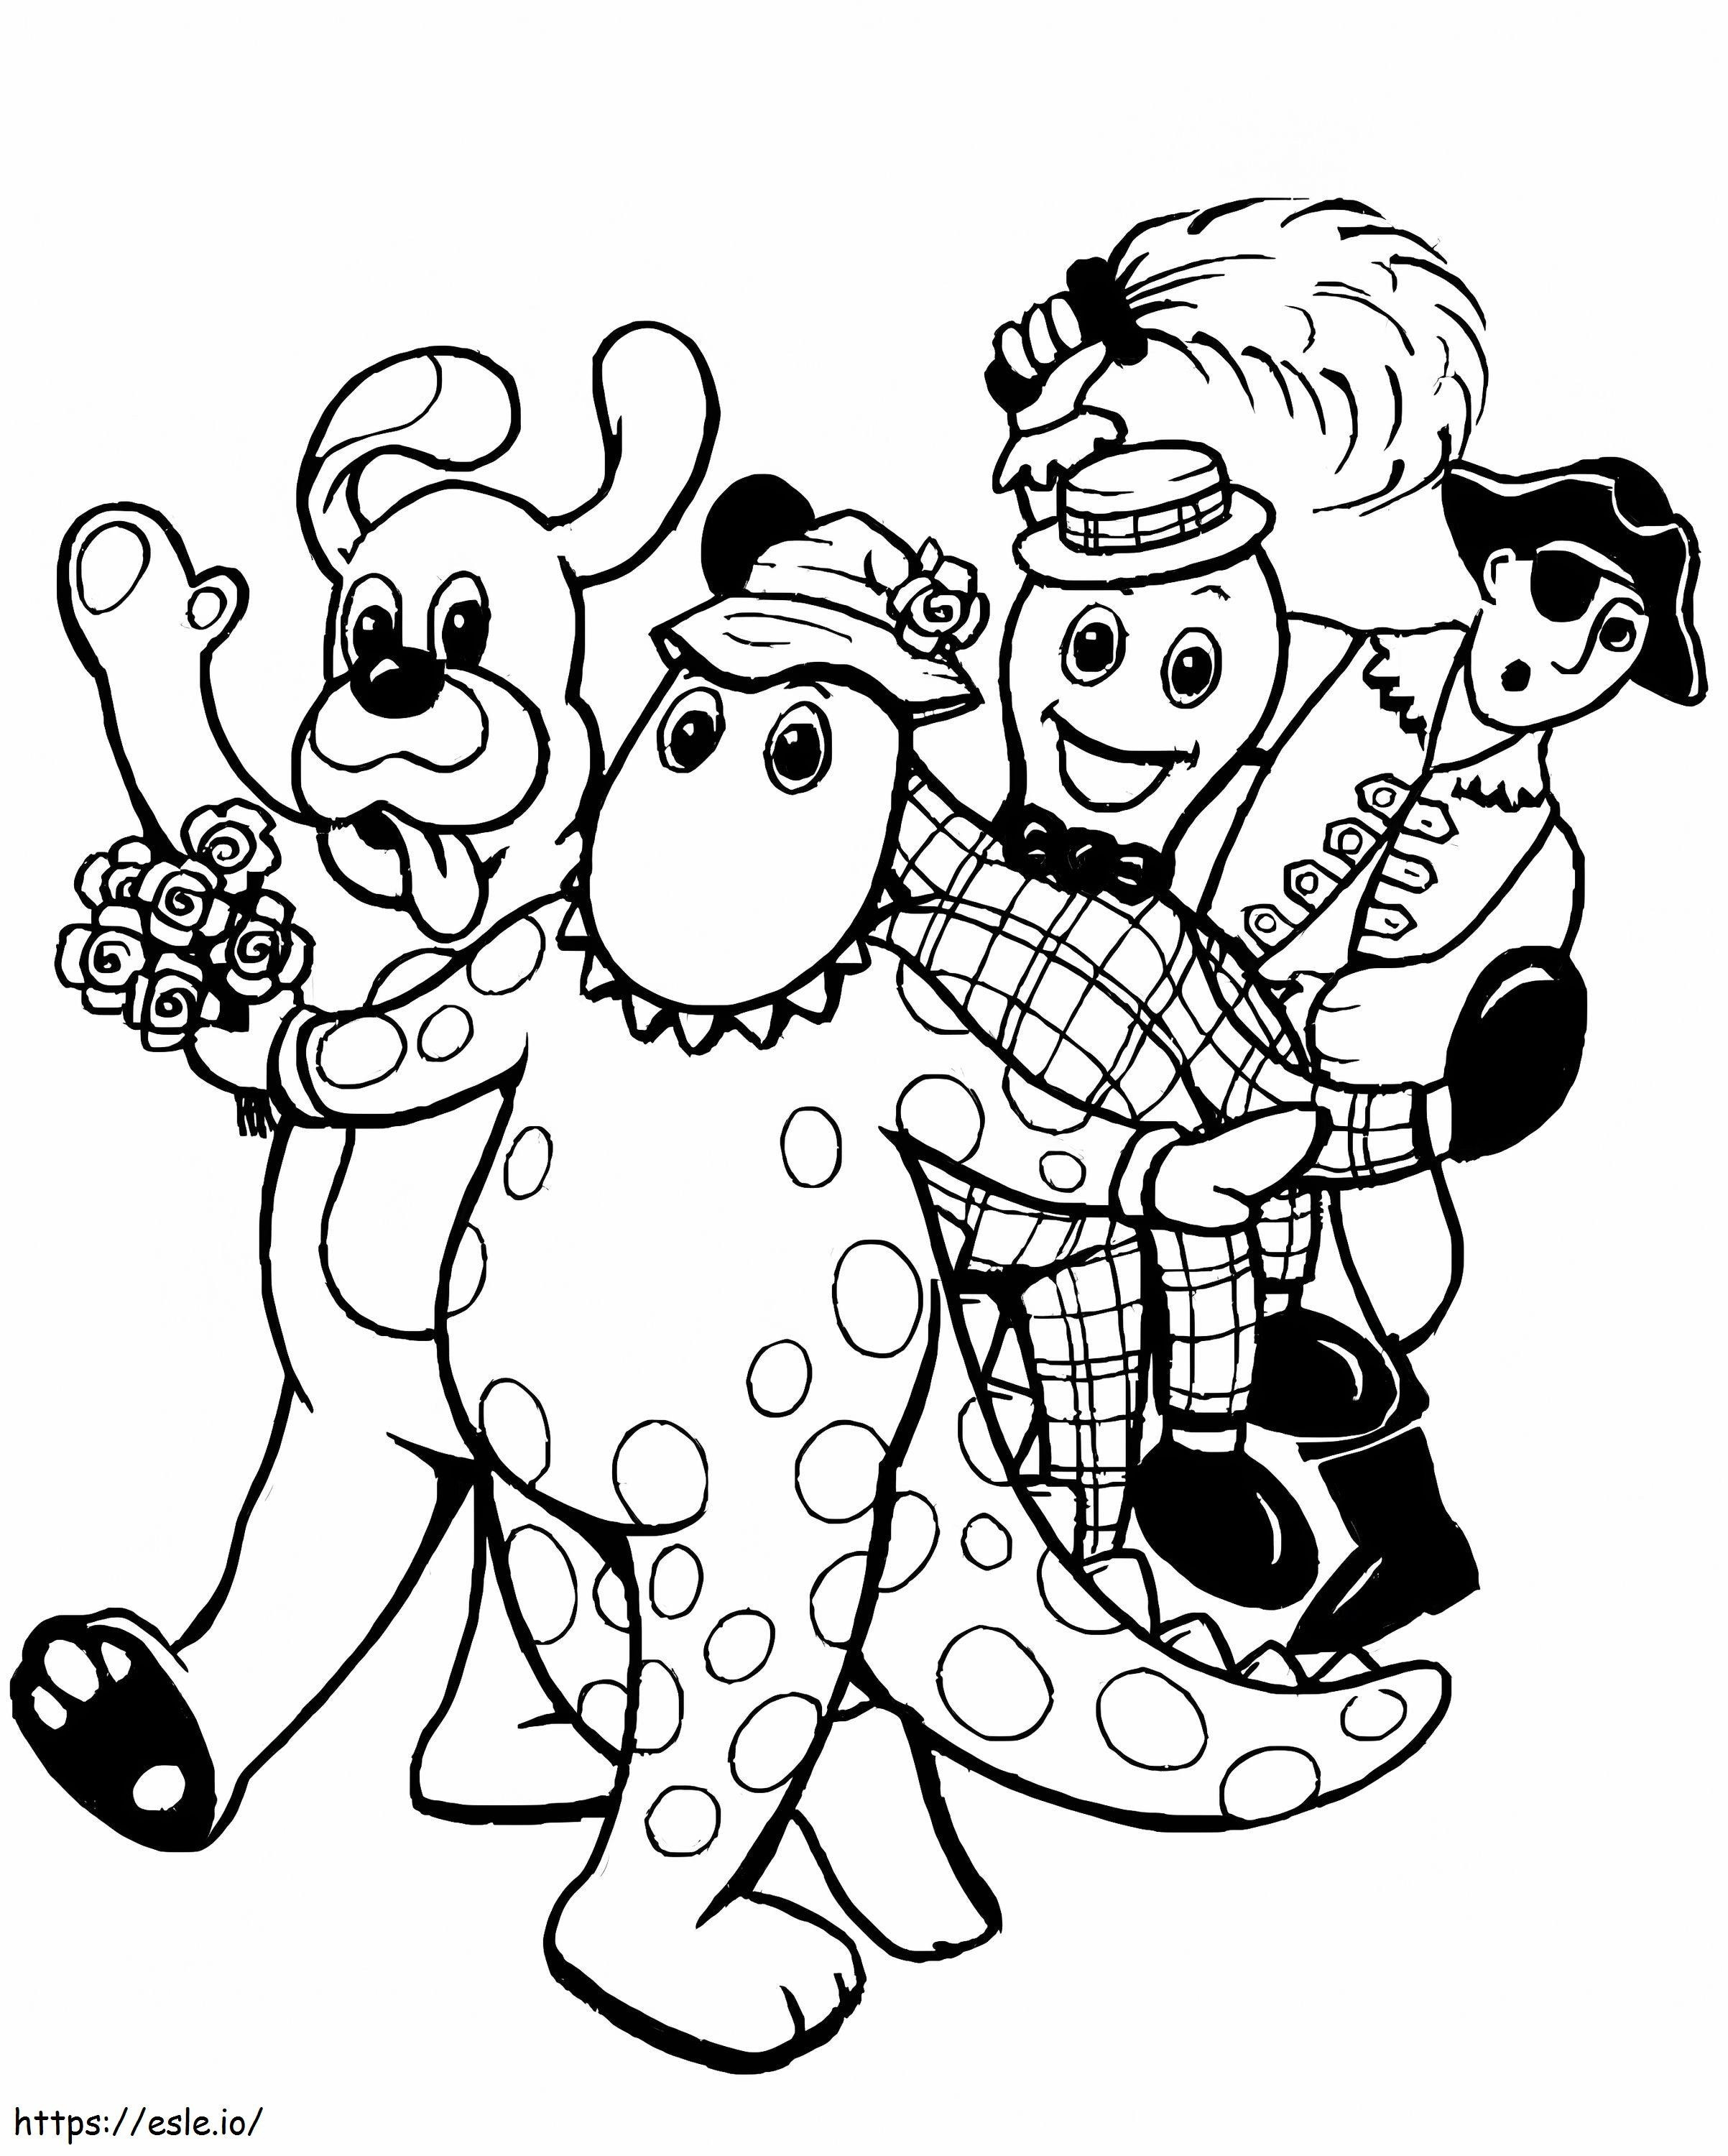 Makeup Wiggles coloring page